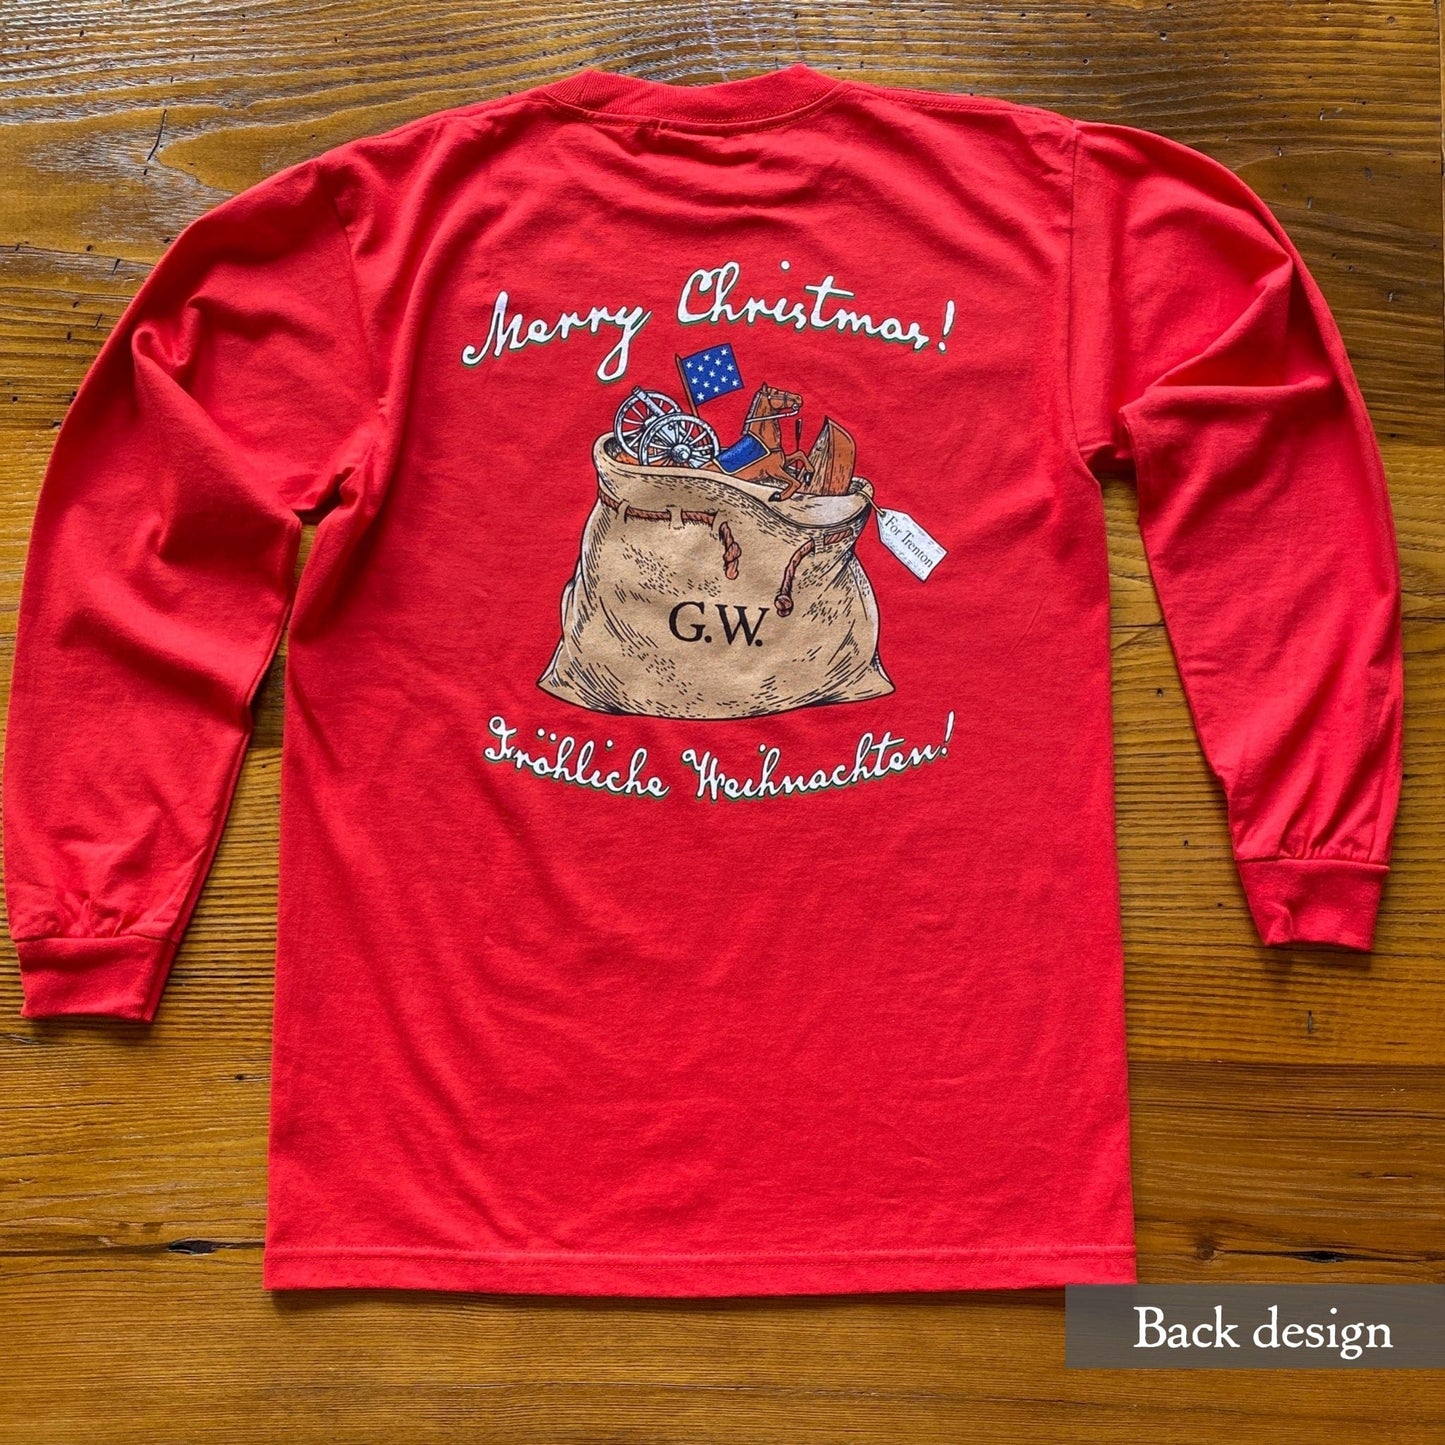 George Washington's Christmas Day Crossing of the Delaware Made in America Long-sleeved shirt — The Christmas shirt for history nerds